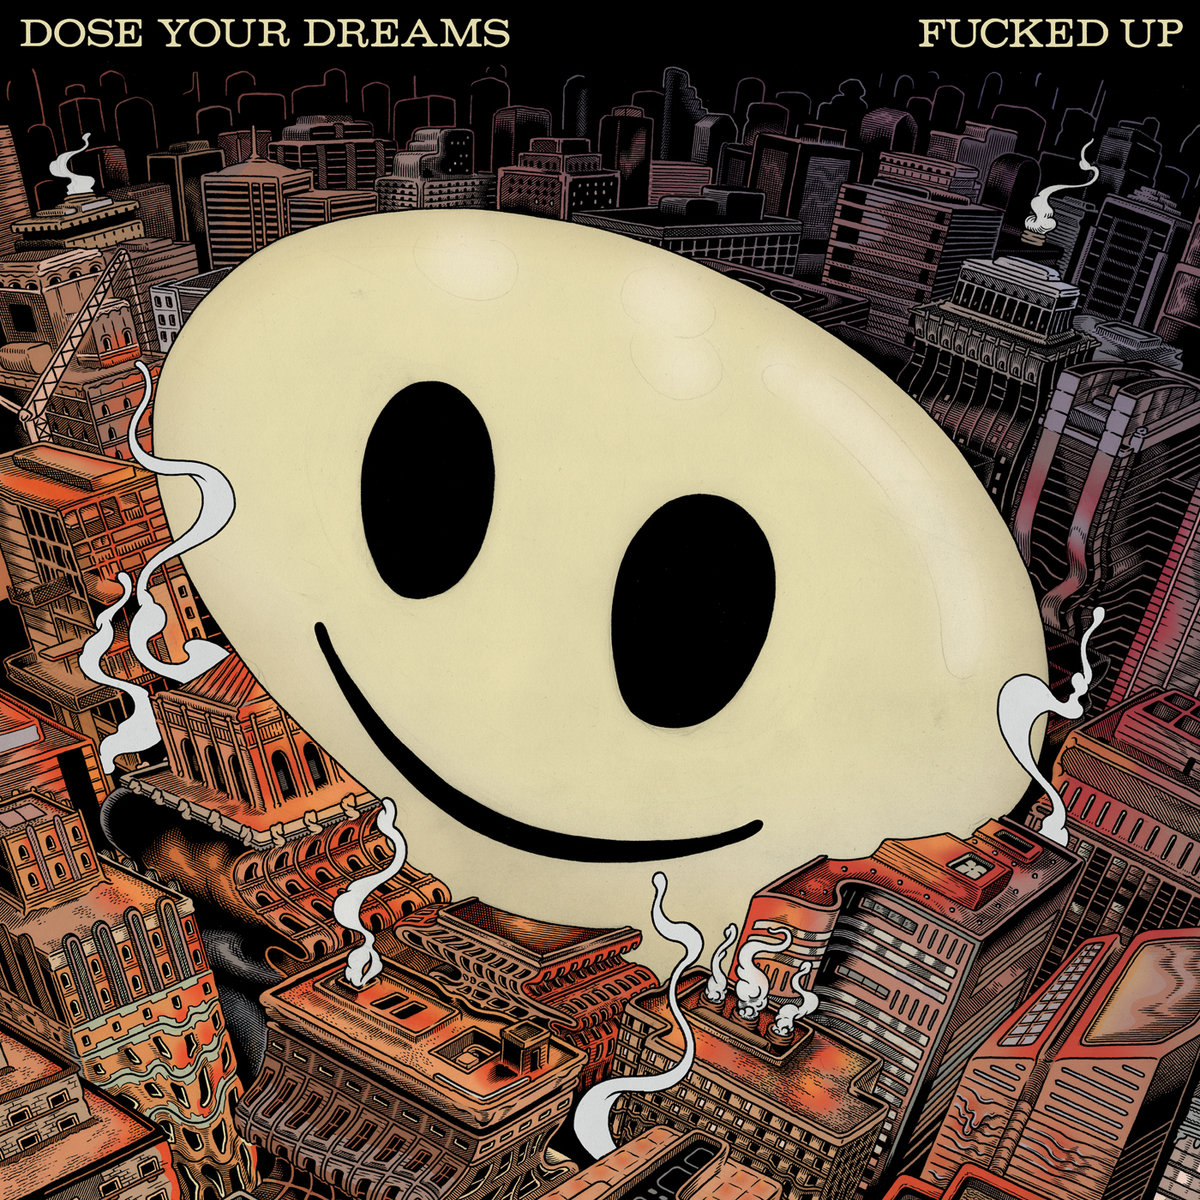 Fucked Up - Dose Your Dreams -Crazyminds.es